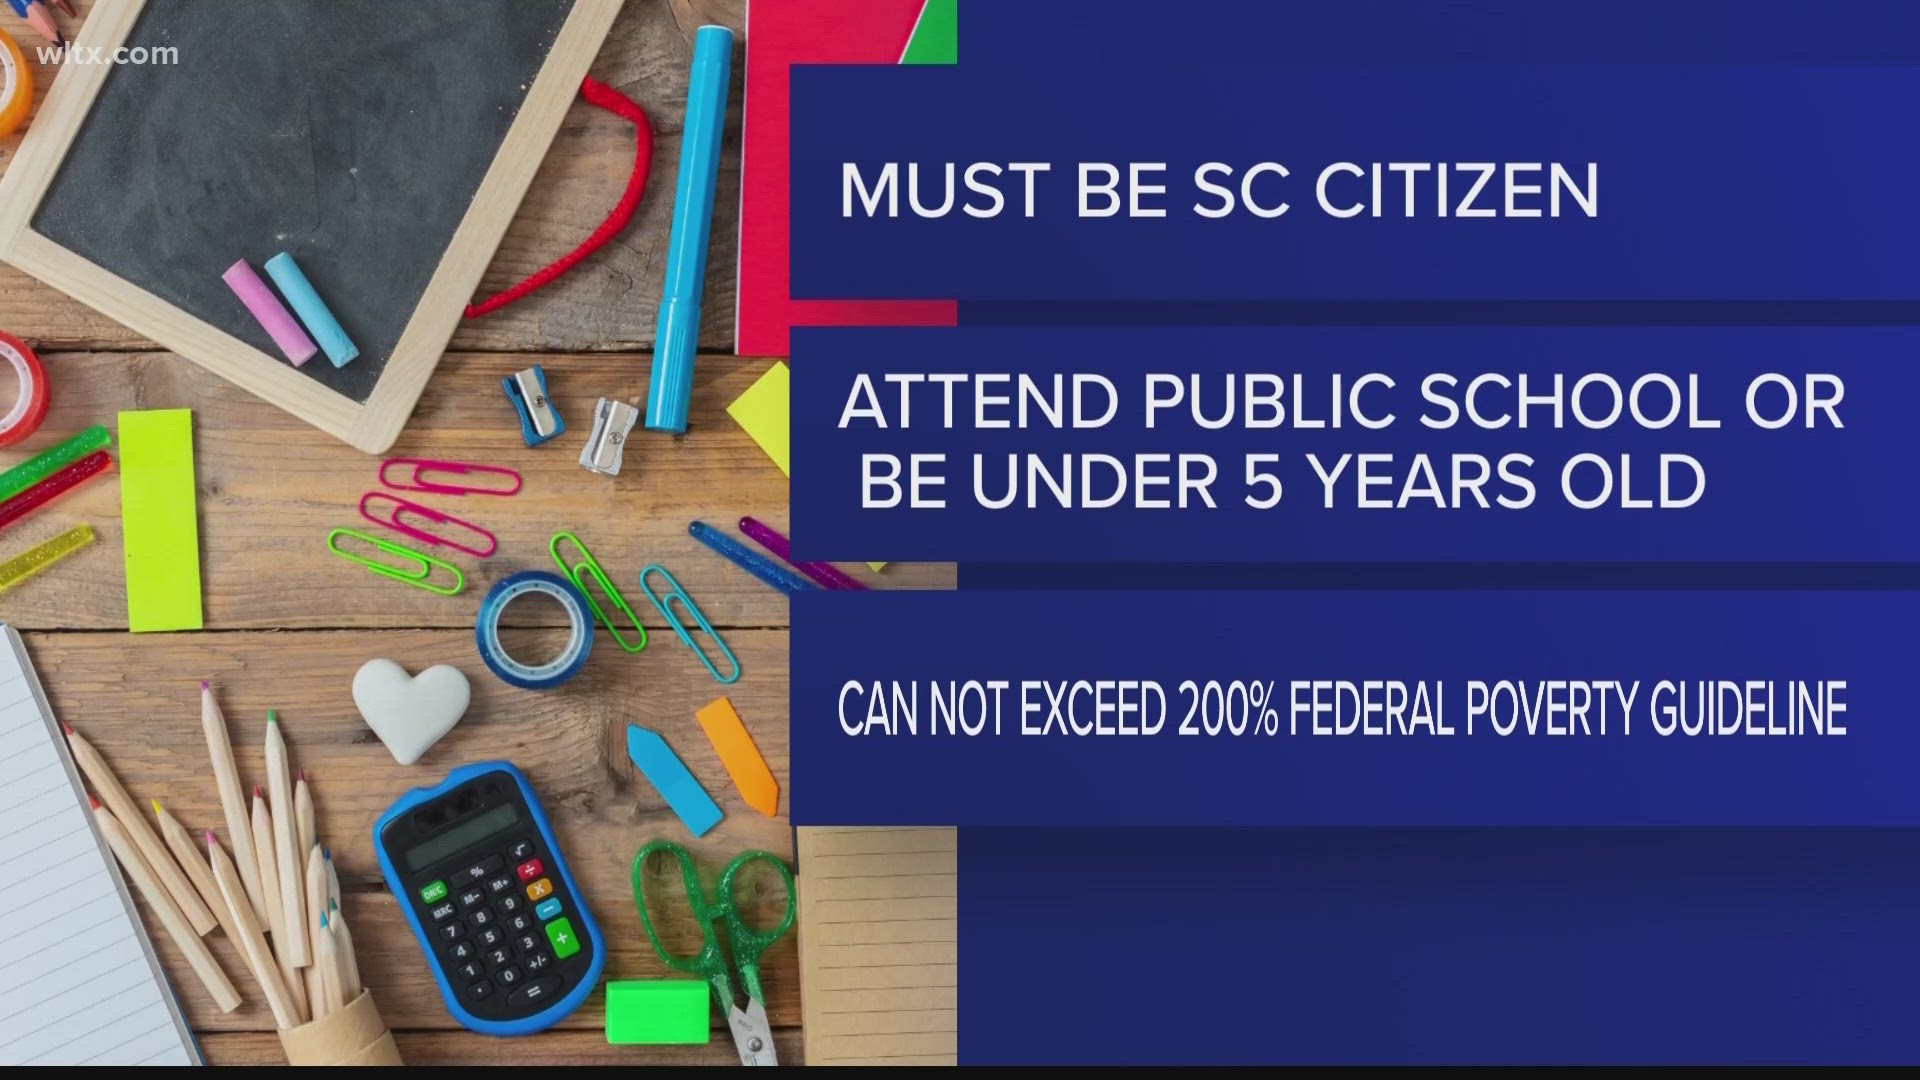 In one week the SC Supreme Court is scheduled to hear a challenge to a new law that would provide vouchers for private schools.